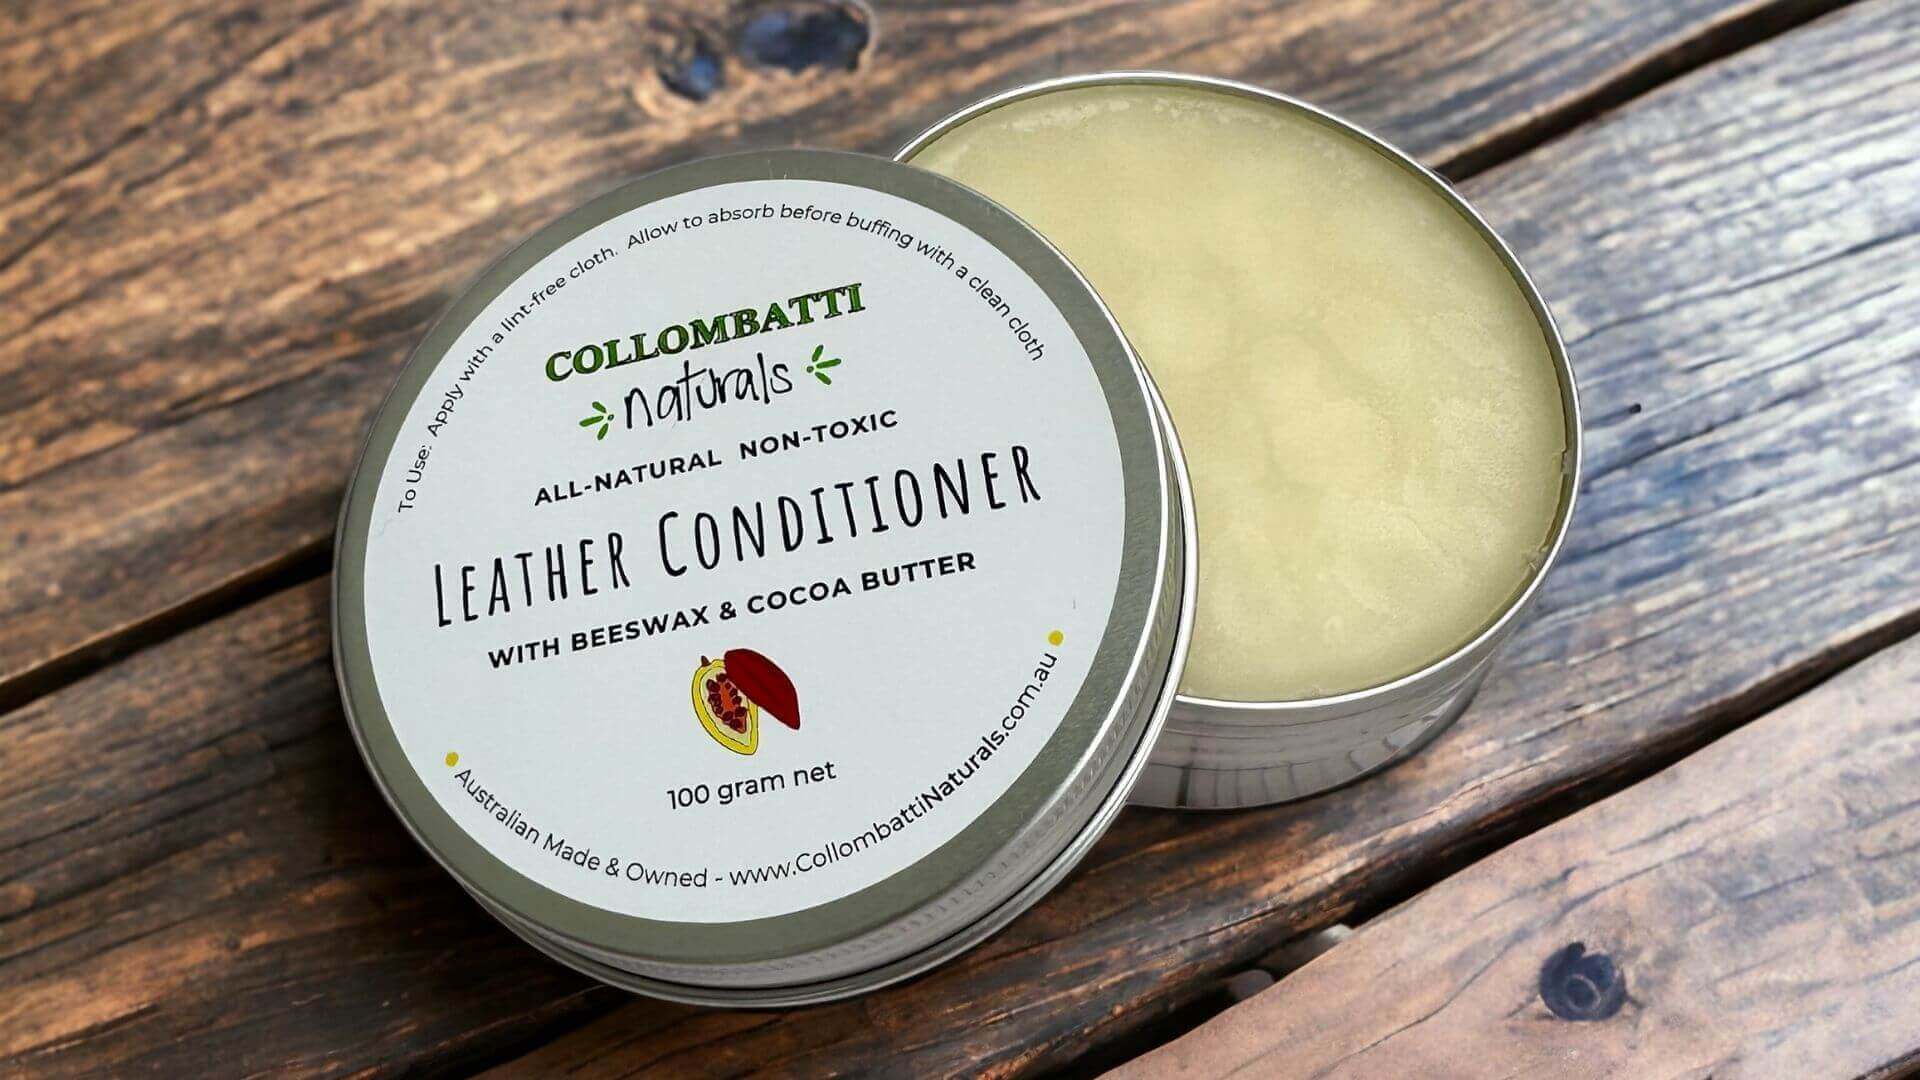 Collombatti Naturals step by step guide to using beeswax leather polish picture of Collombatti Naturals beeswax leather conditioner with the lid off